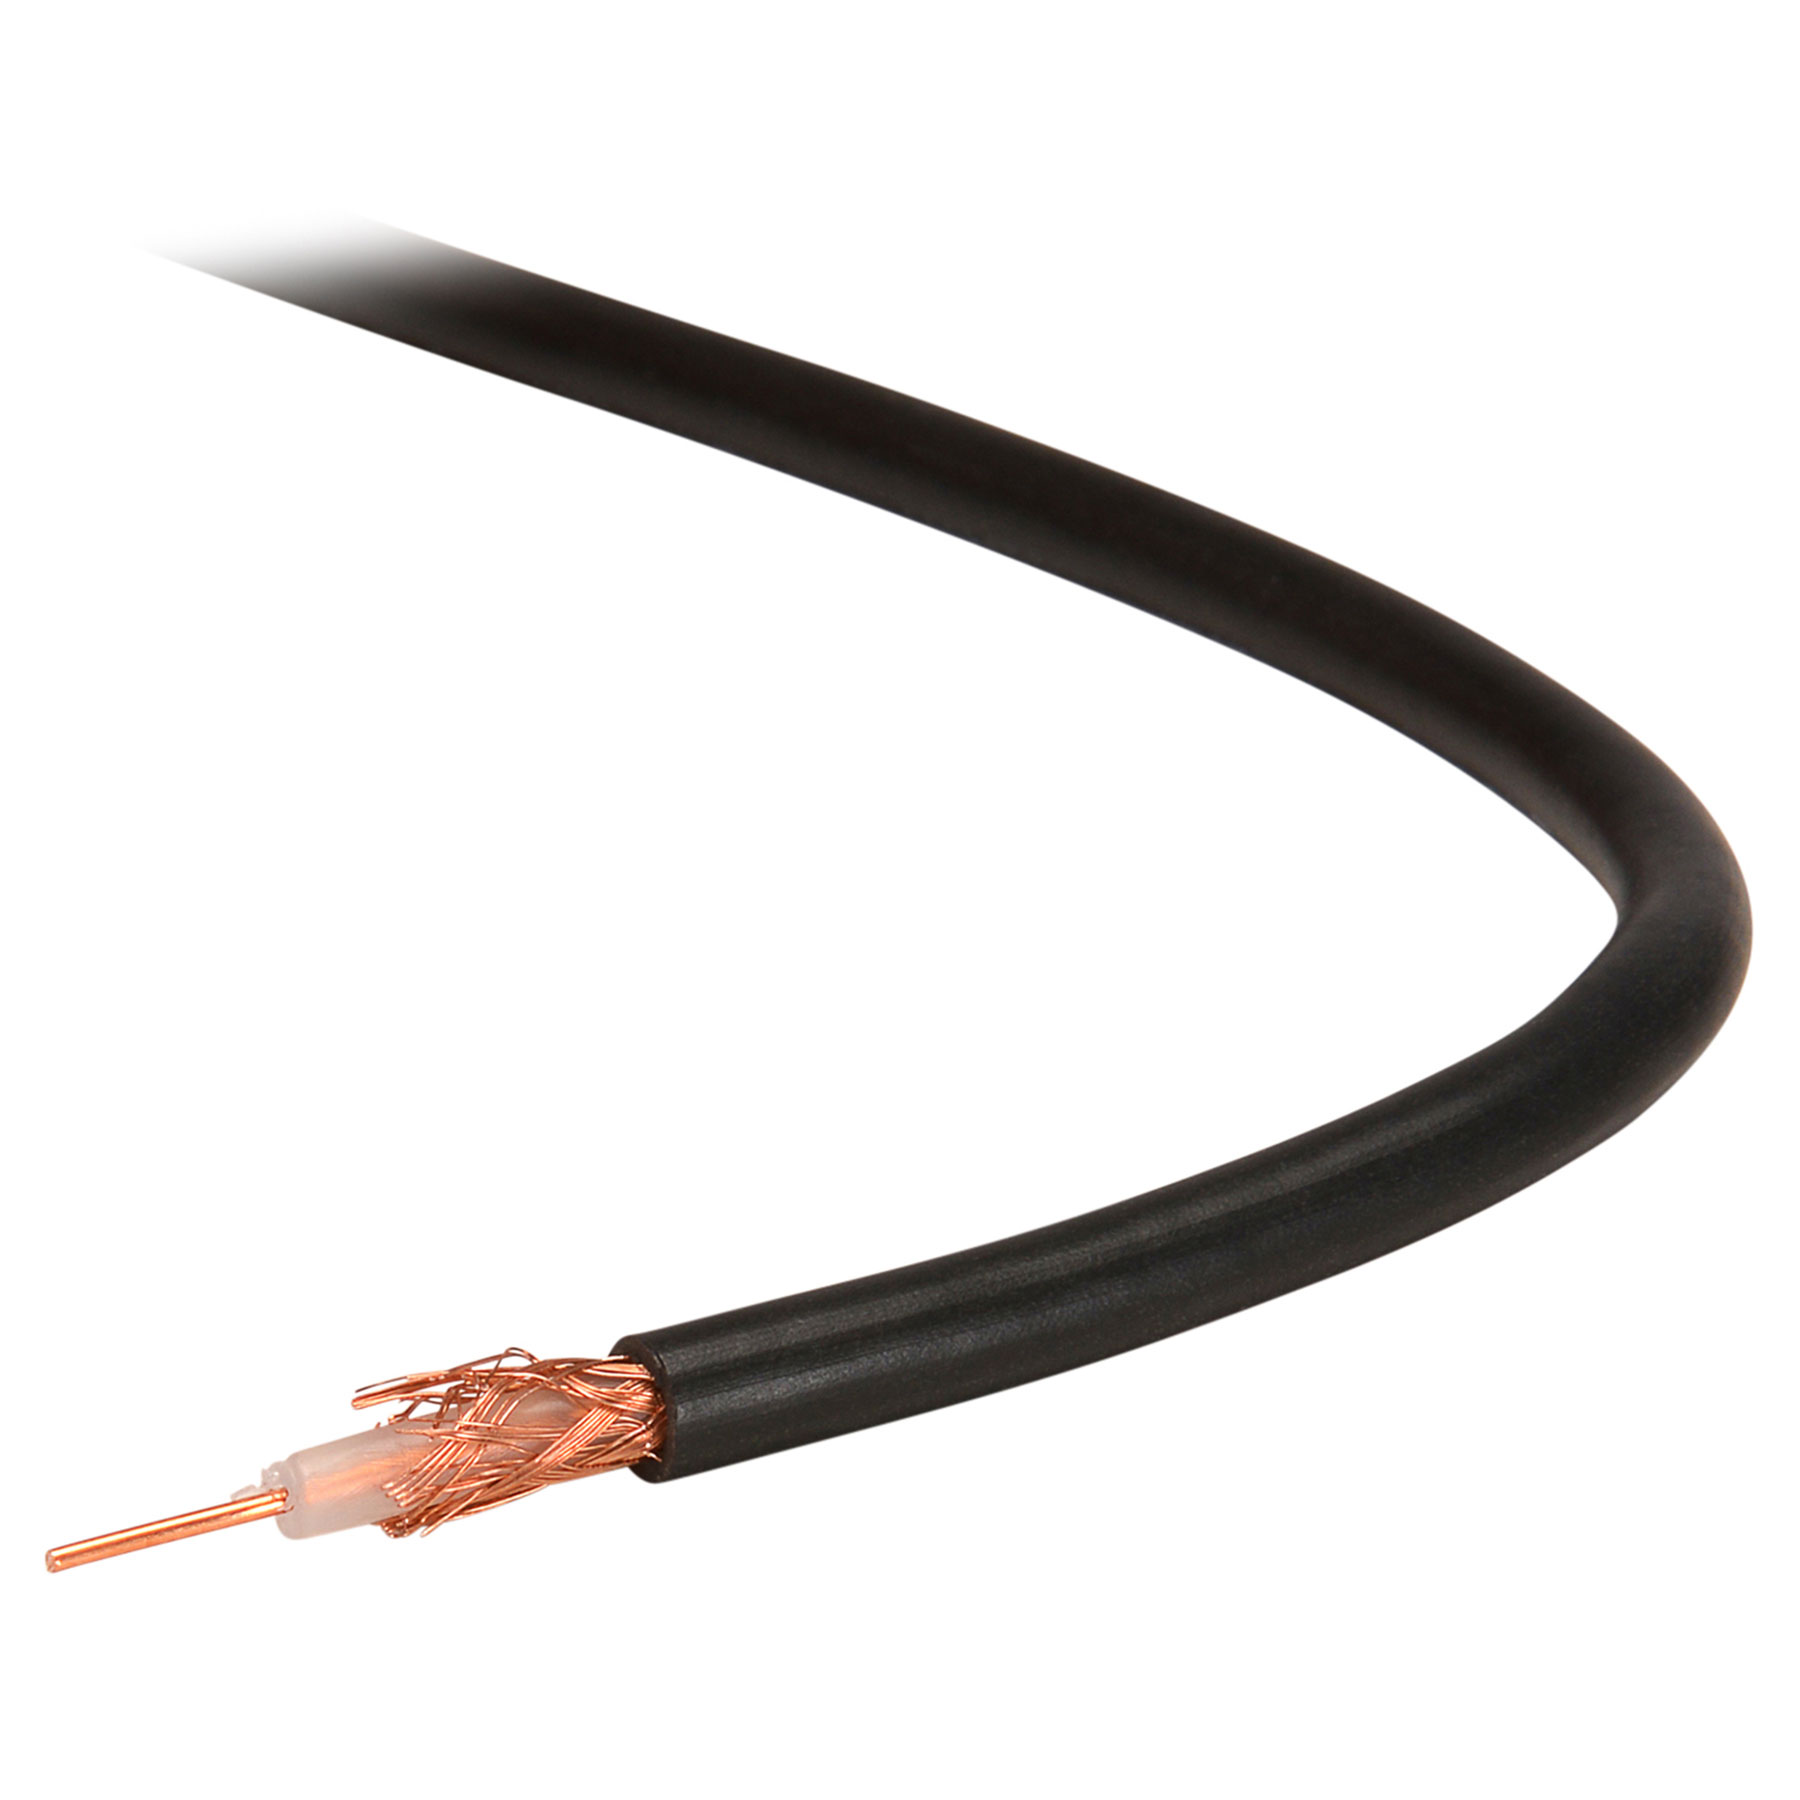 Belden 9201 RG-58/U Coaxial Cable 20 AWG Conductor Bare Copper Braid ...